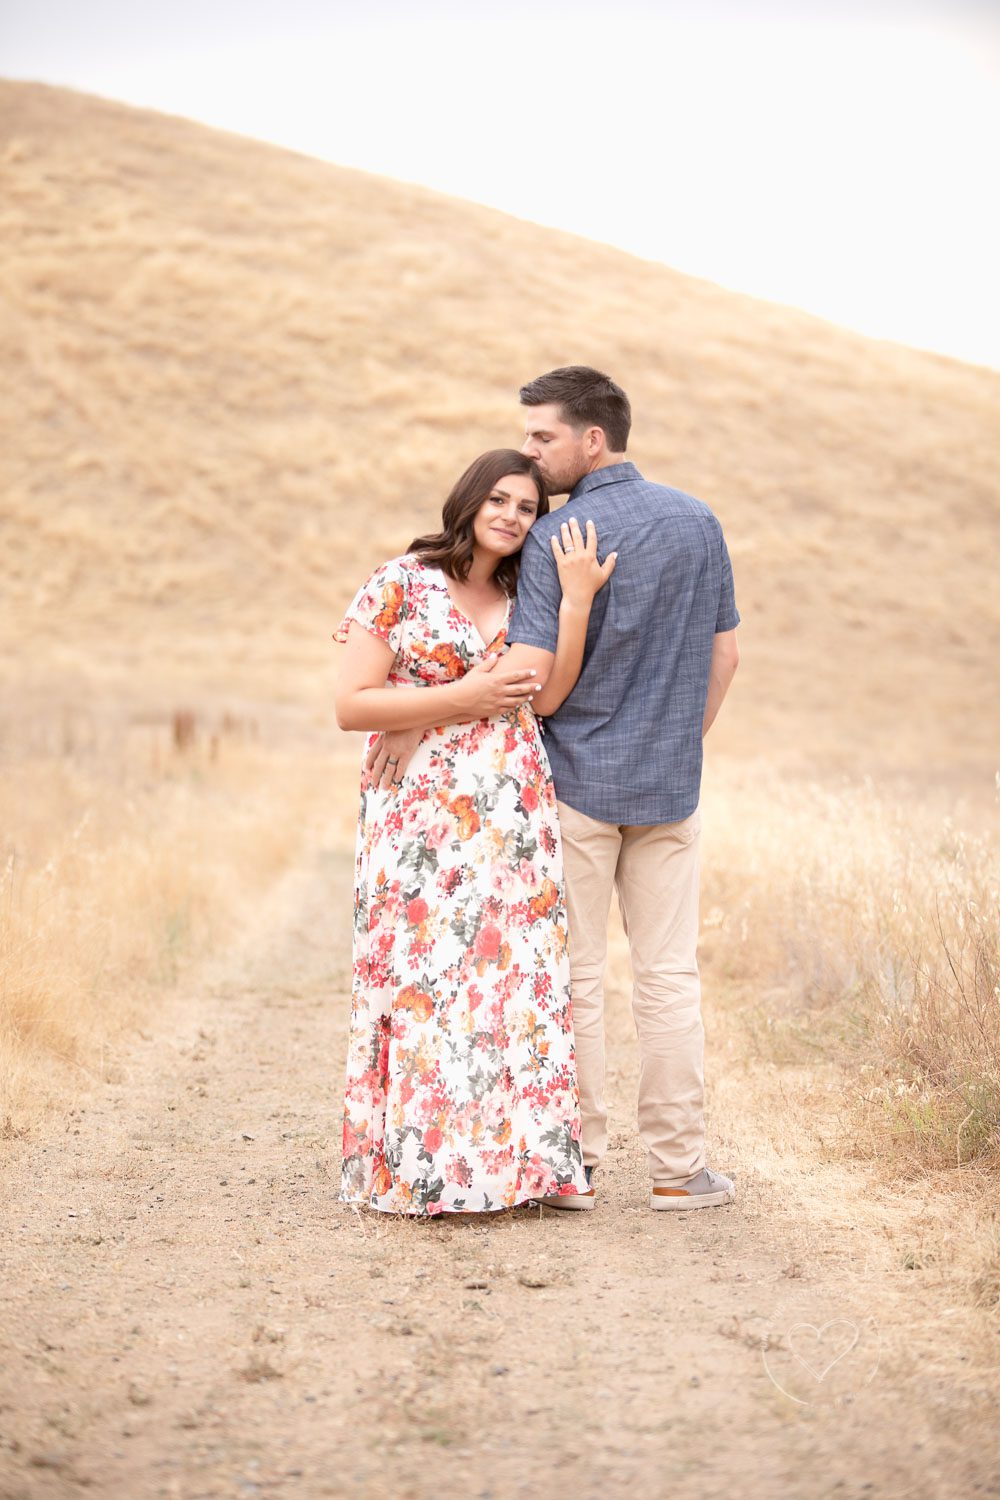 maternity, mom and dad close together, dad kissing mom's head, floral dress, dry grassy foothills, fresno, clovis, photographer